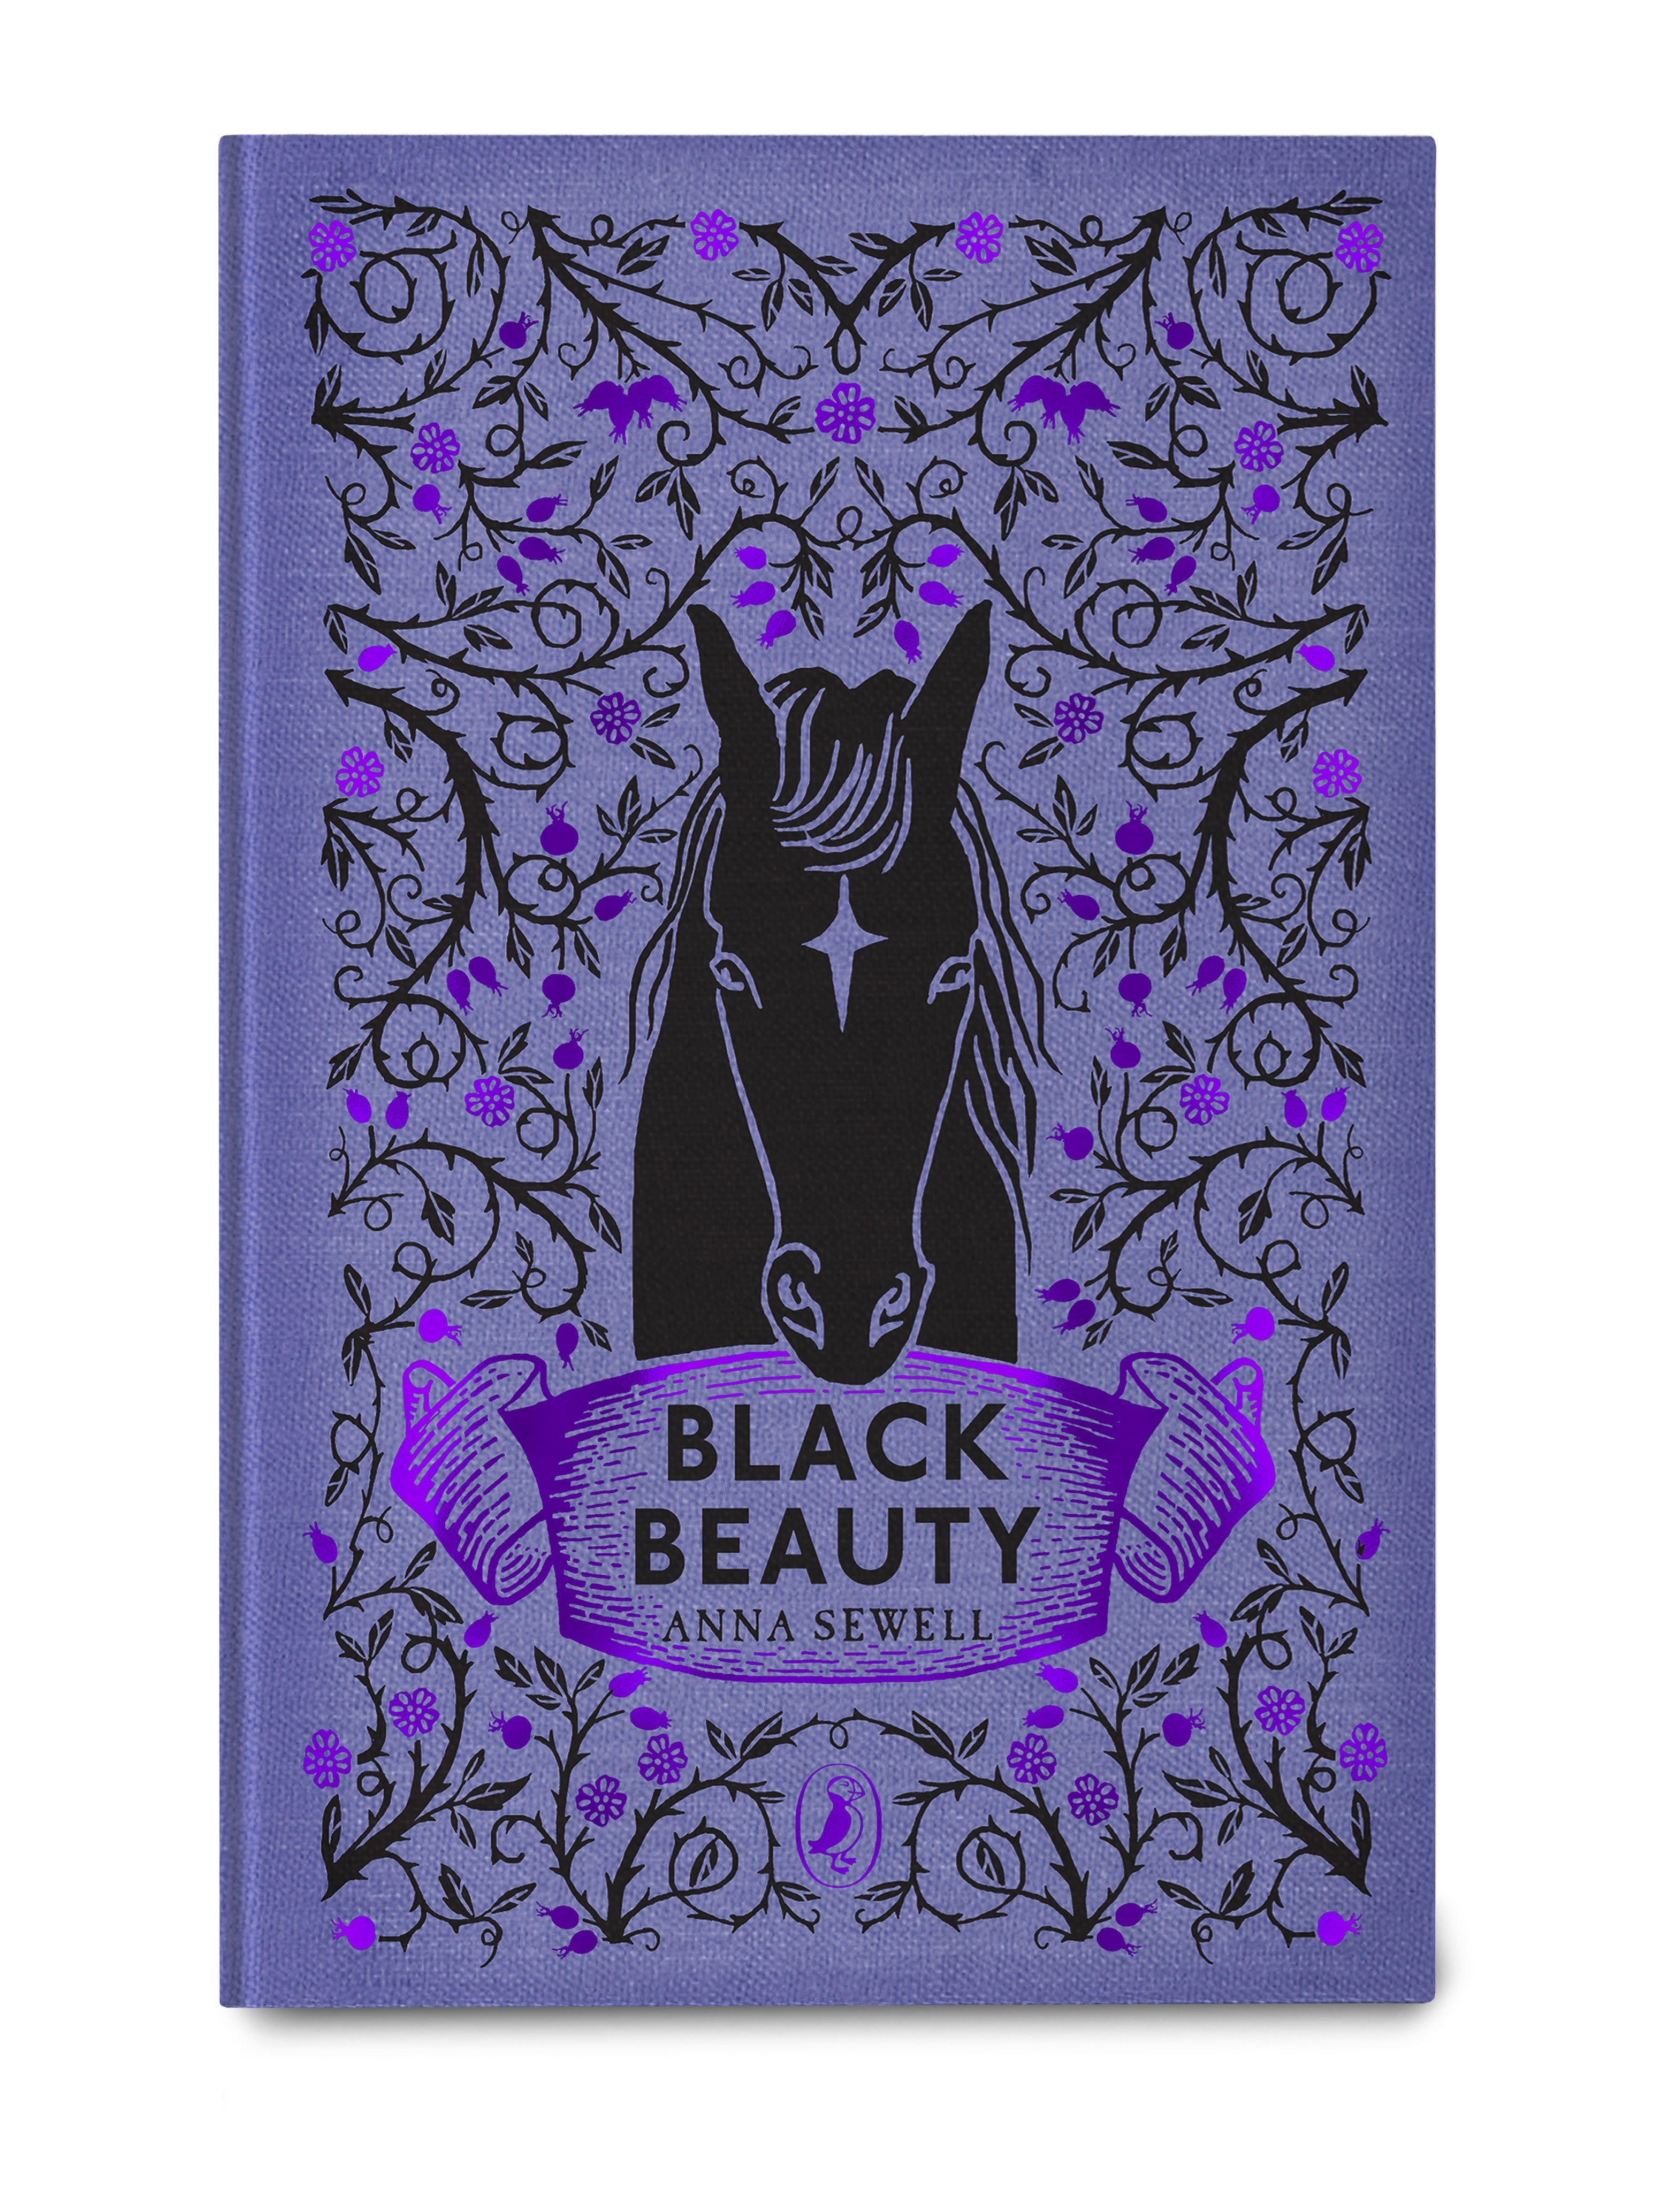 Book “Black Beauty” by Anna Sewell — September 5, 2019